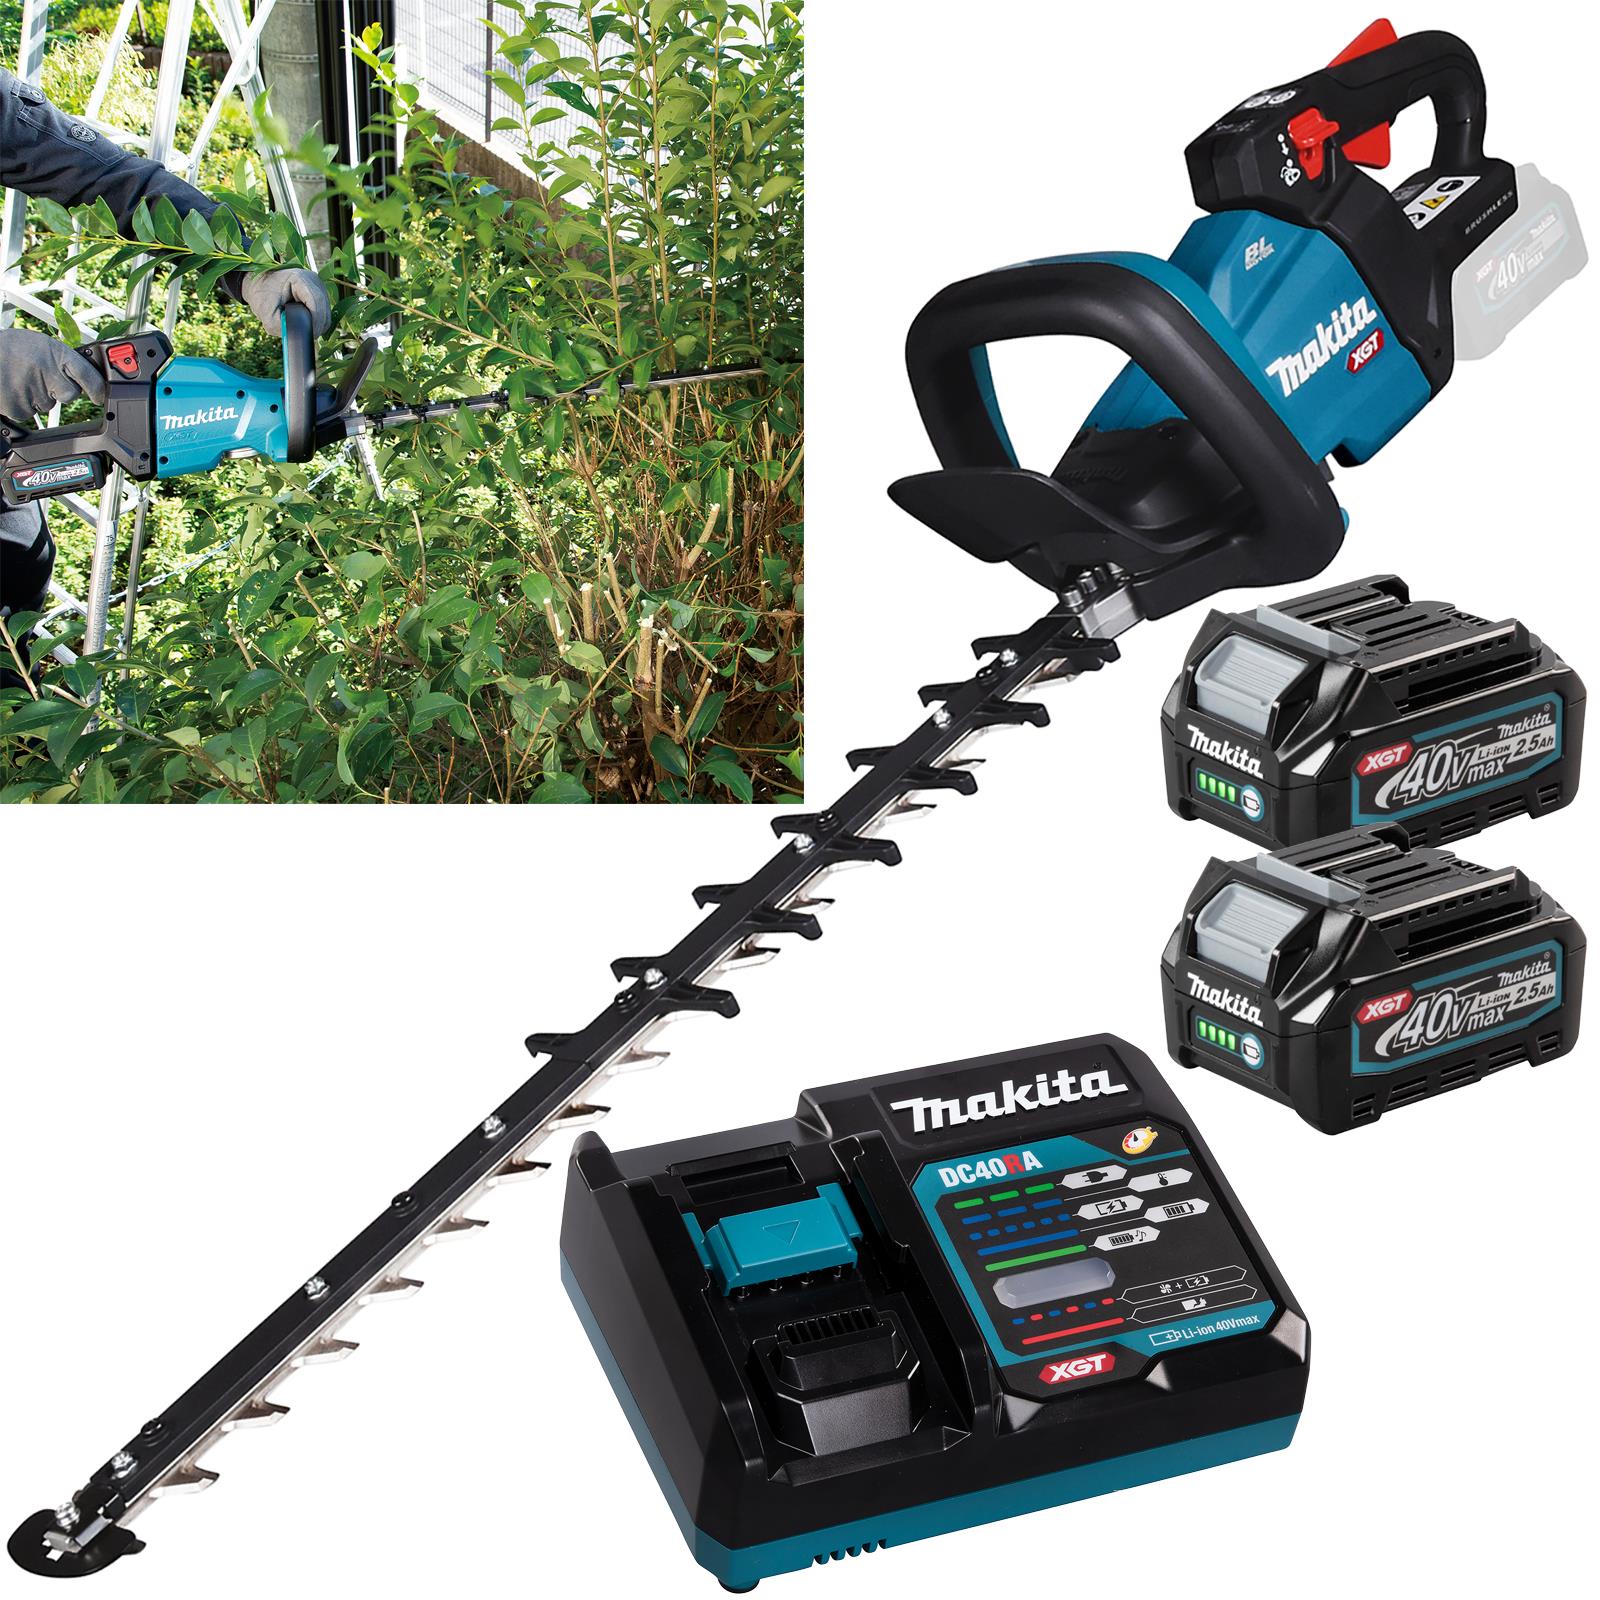 Makita Hedge Trimmer Kit 60cm 40V XGT Li-ion Brushless Cordless 2 x 2.5Ah Battery and Rapid Charger Garden Bush Cutter Cutting UH006GD201